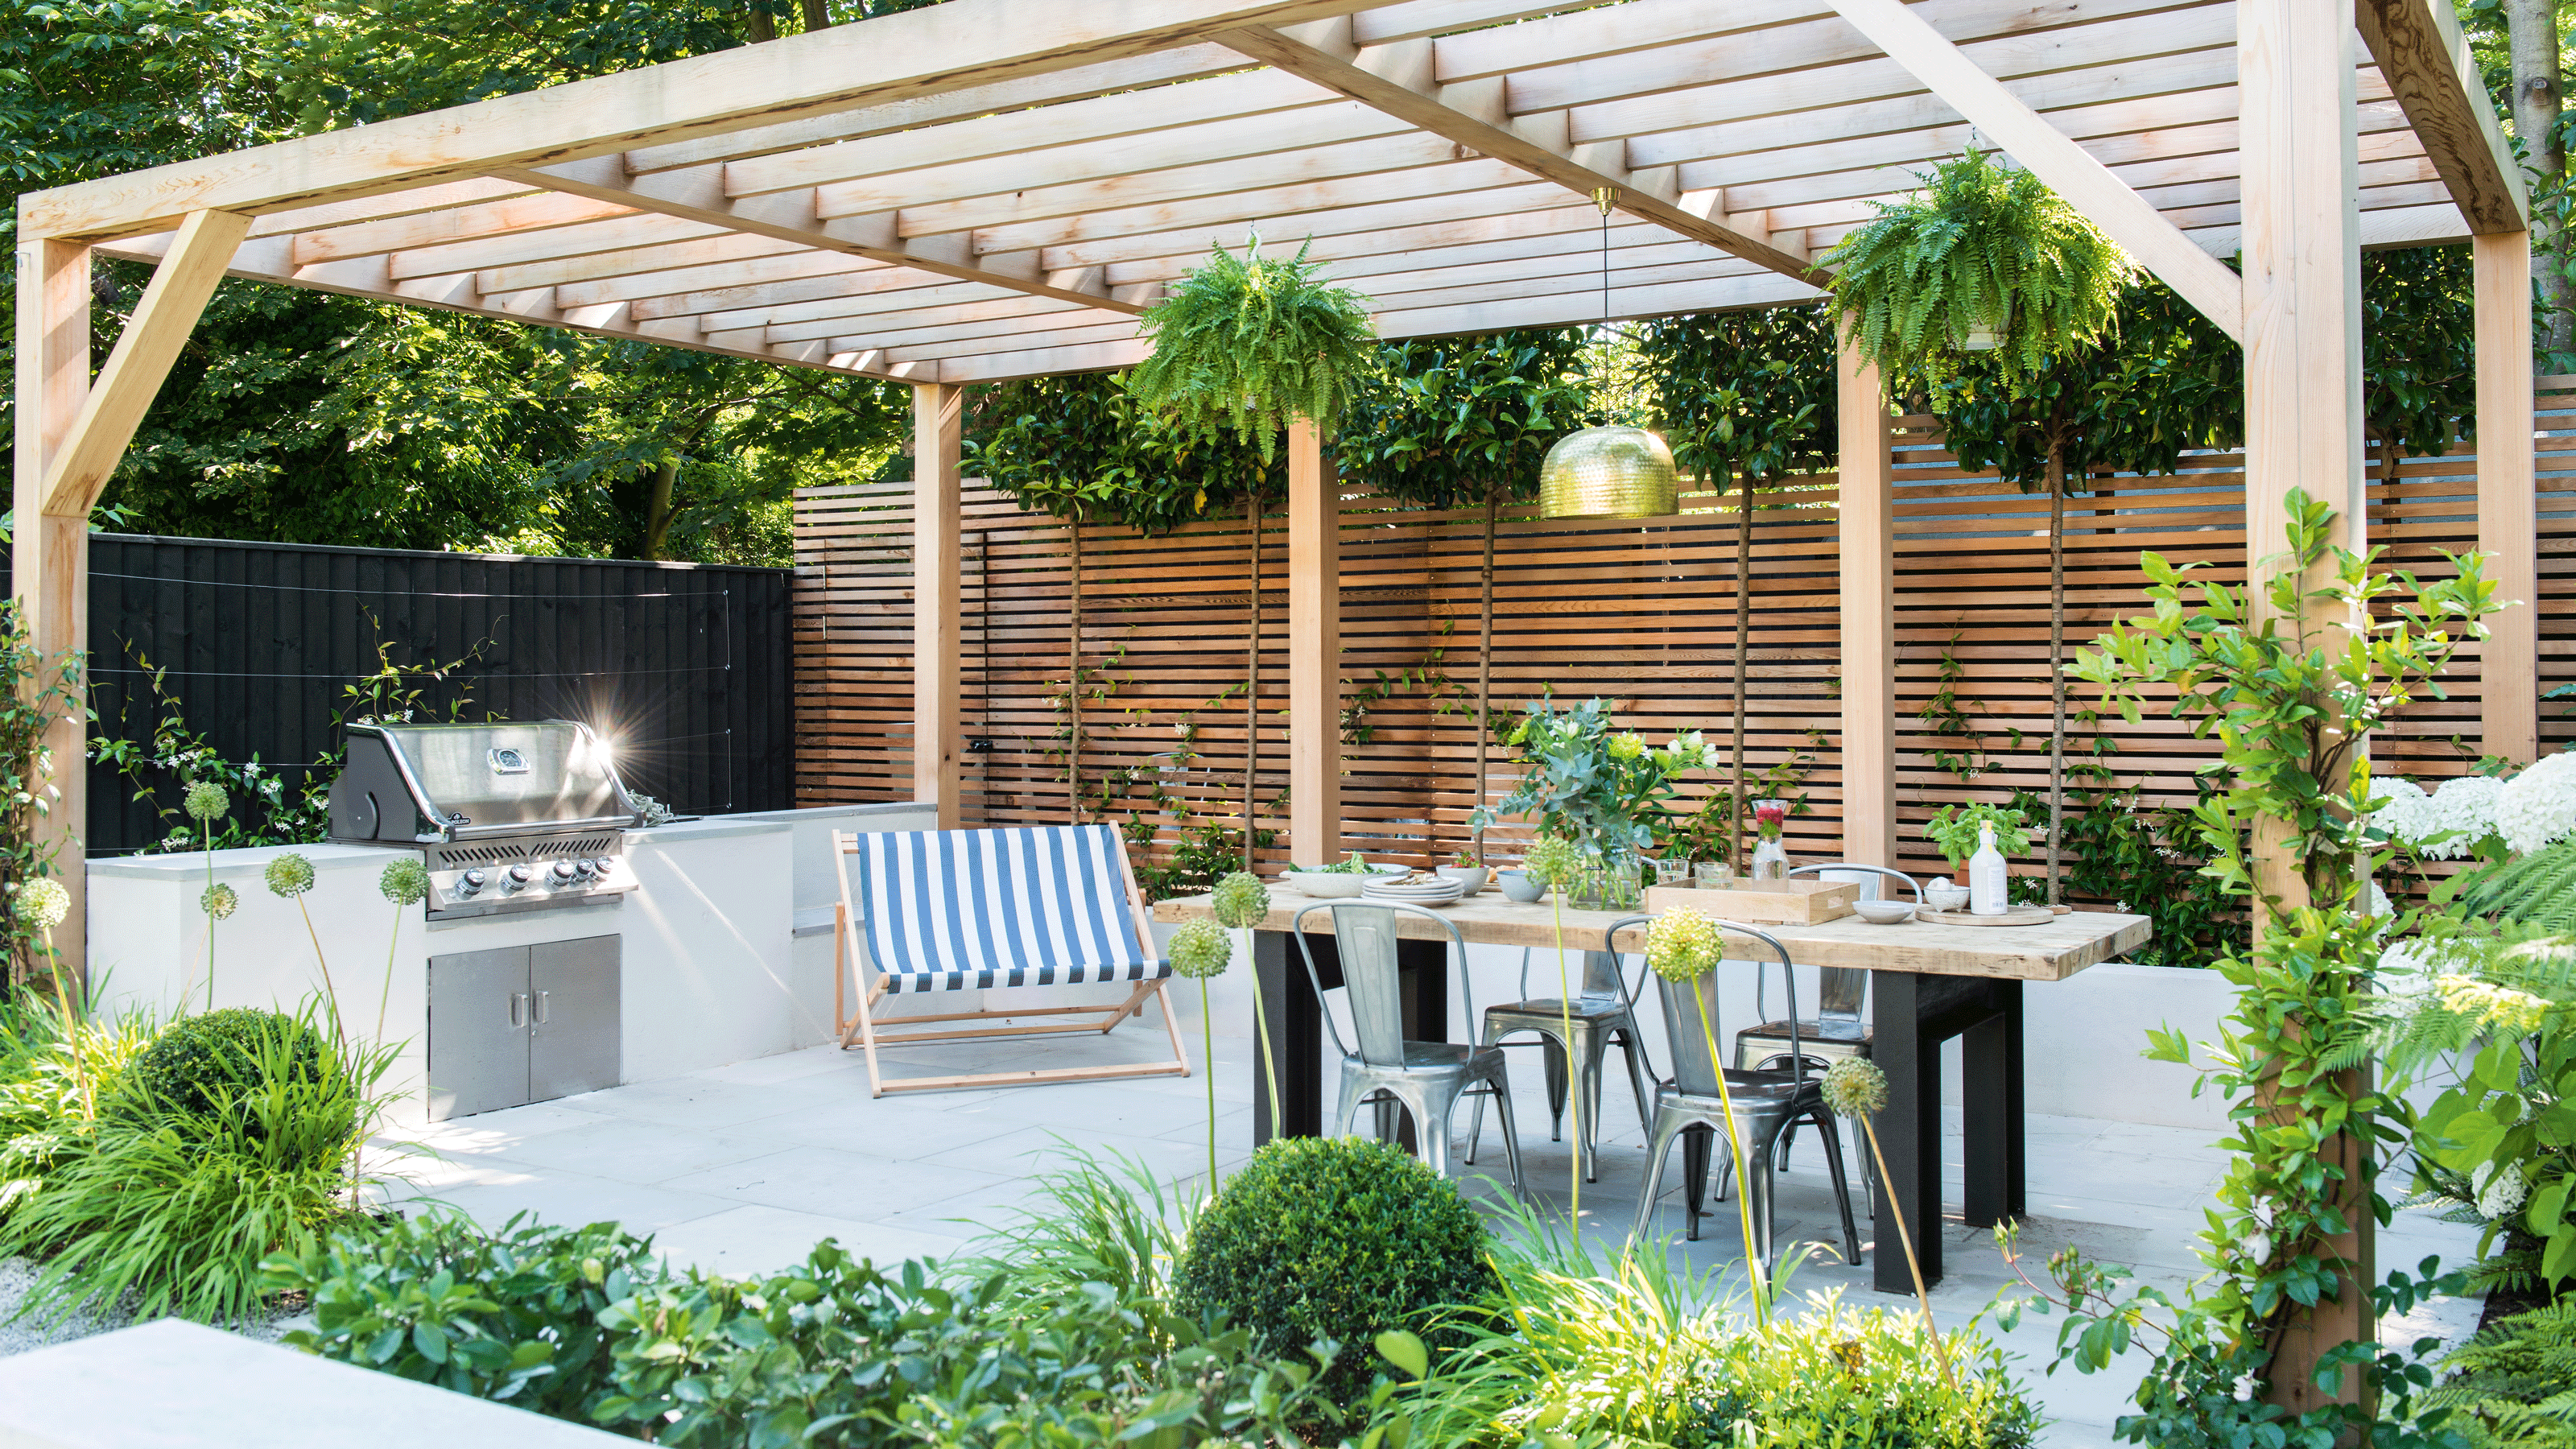 Pergola over a large patio with BBQ